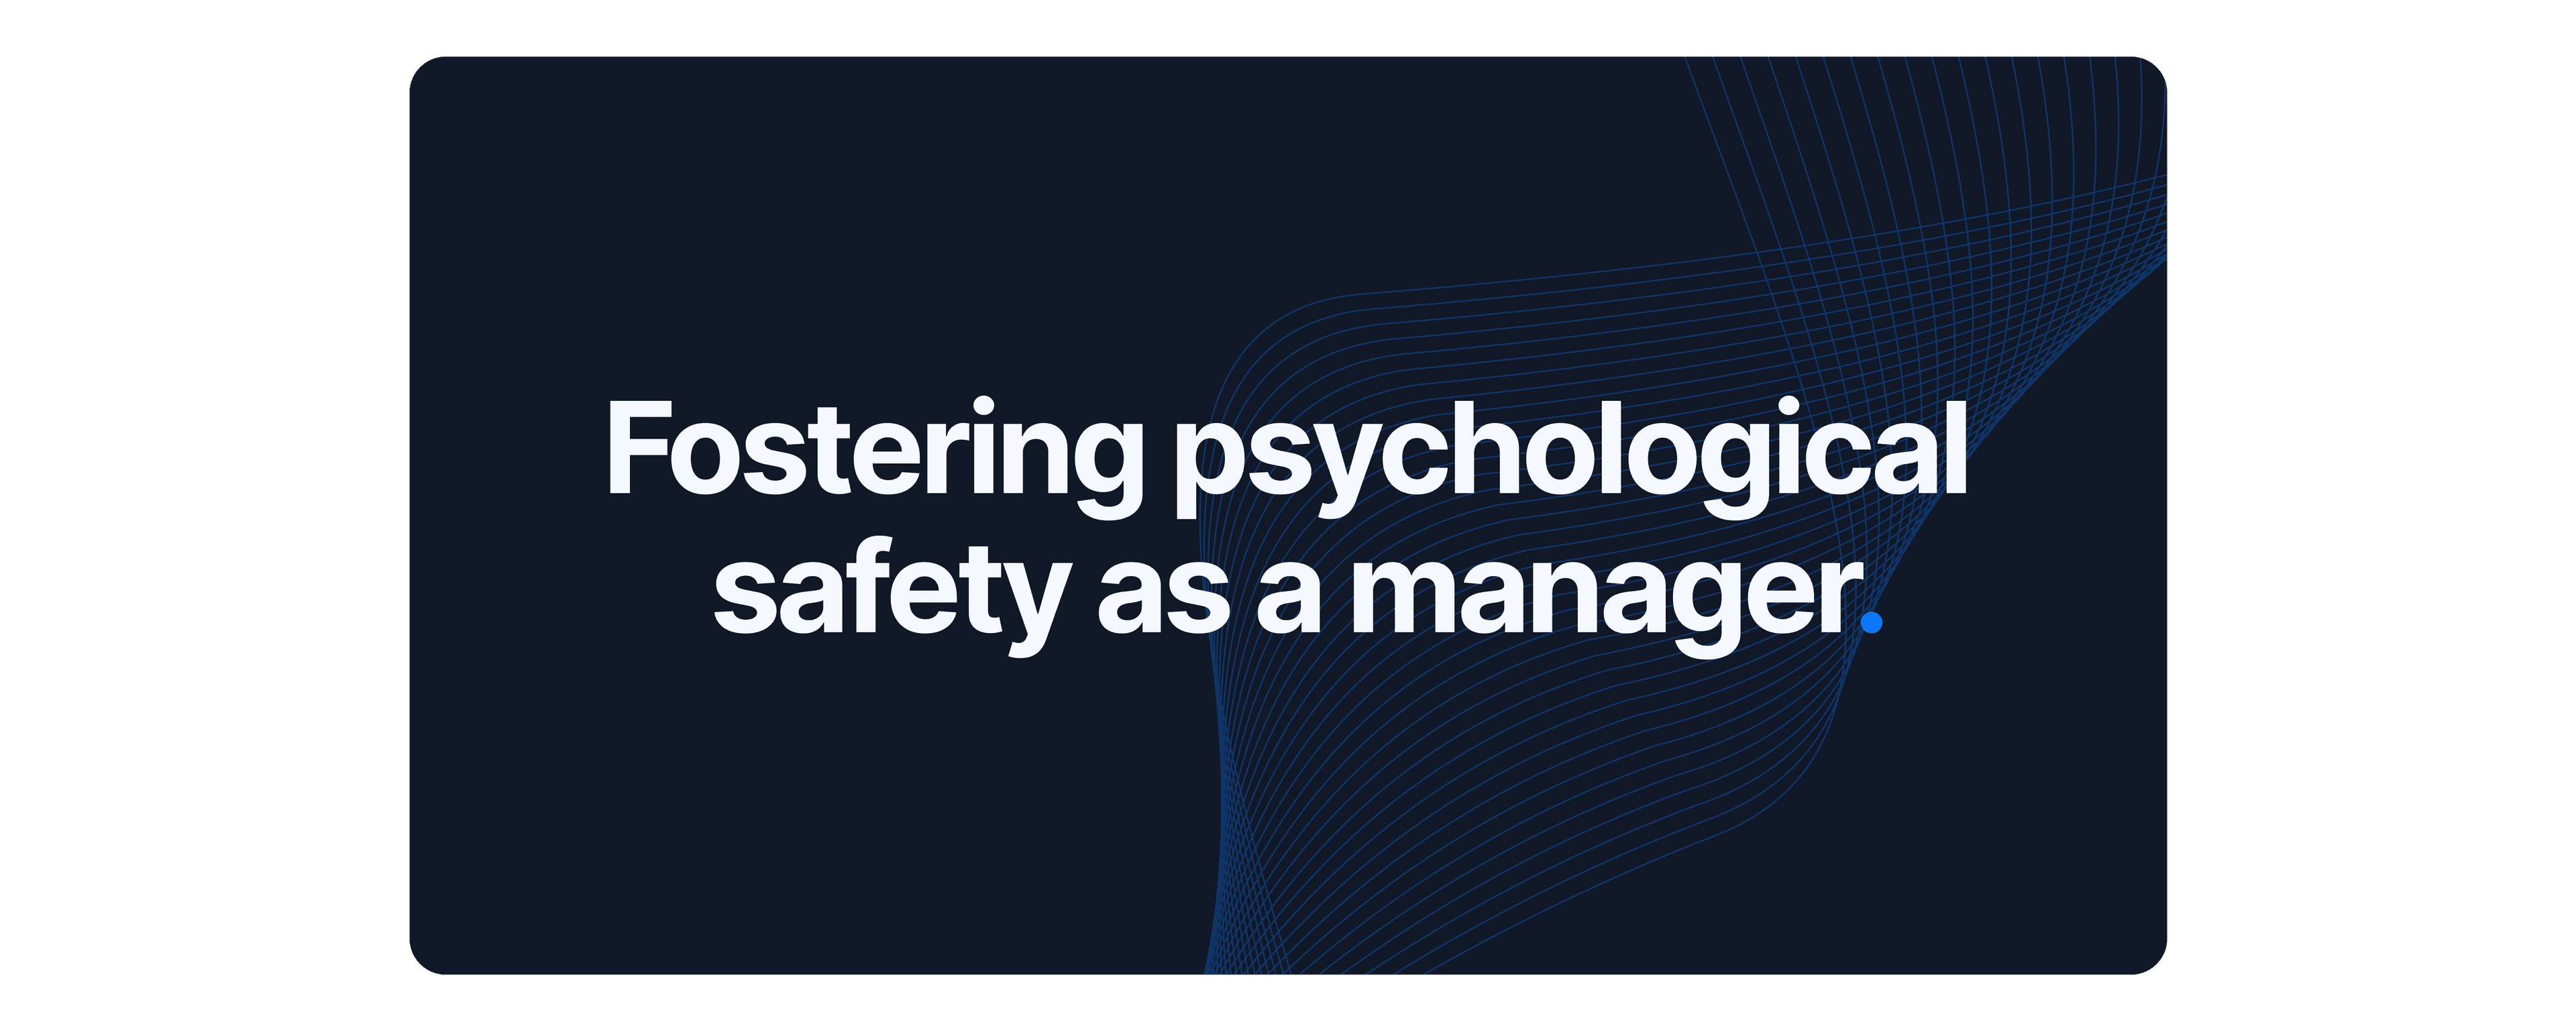 Fostering psychological safety as a manager